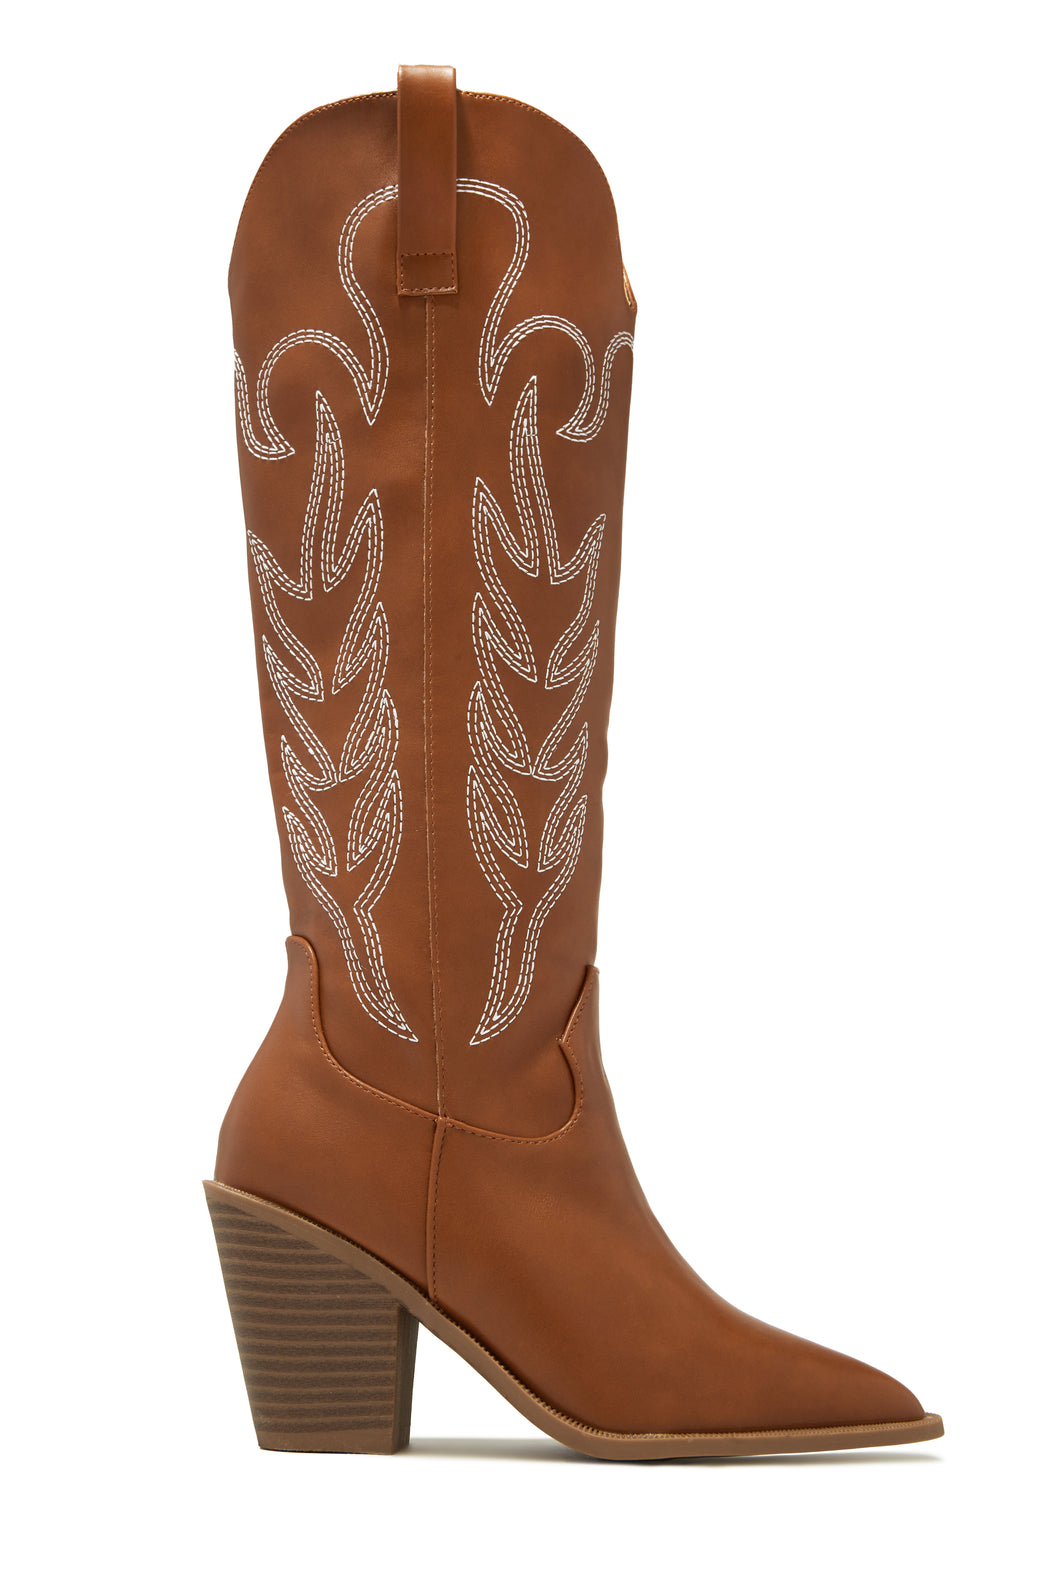 Exclusive Performance Cowgirl Boots - Tan